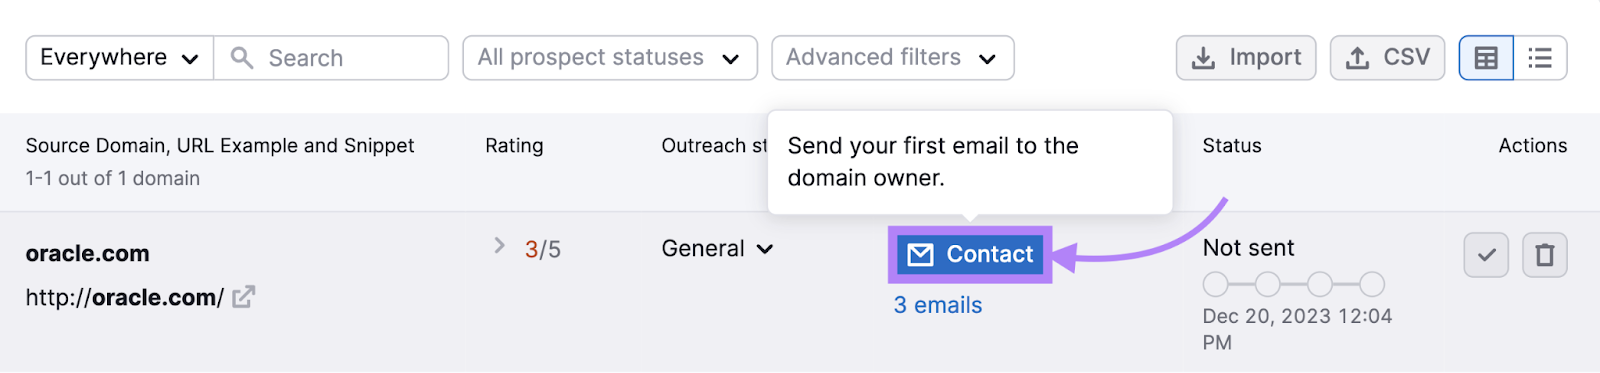 "Contact" button selected next to "oracle.com"